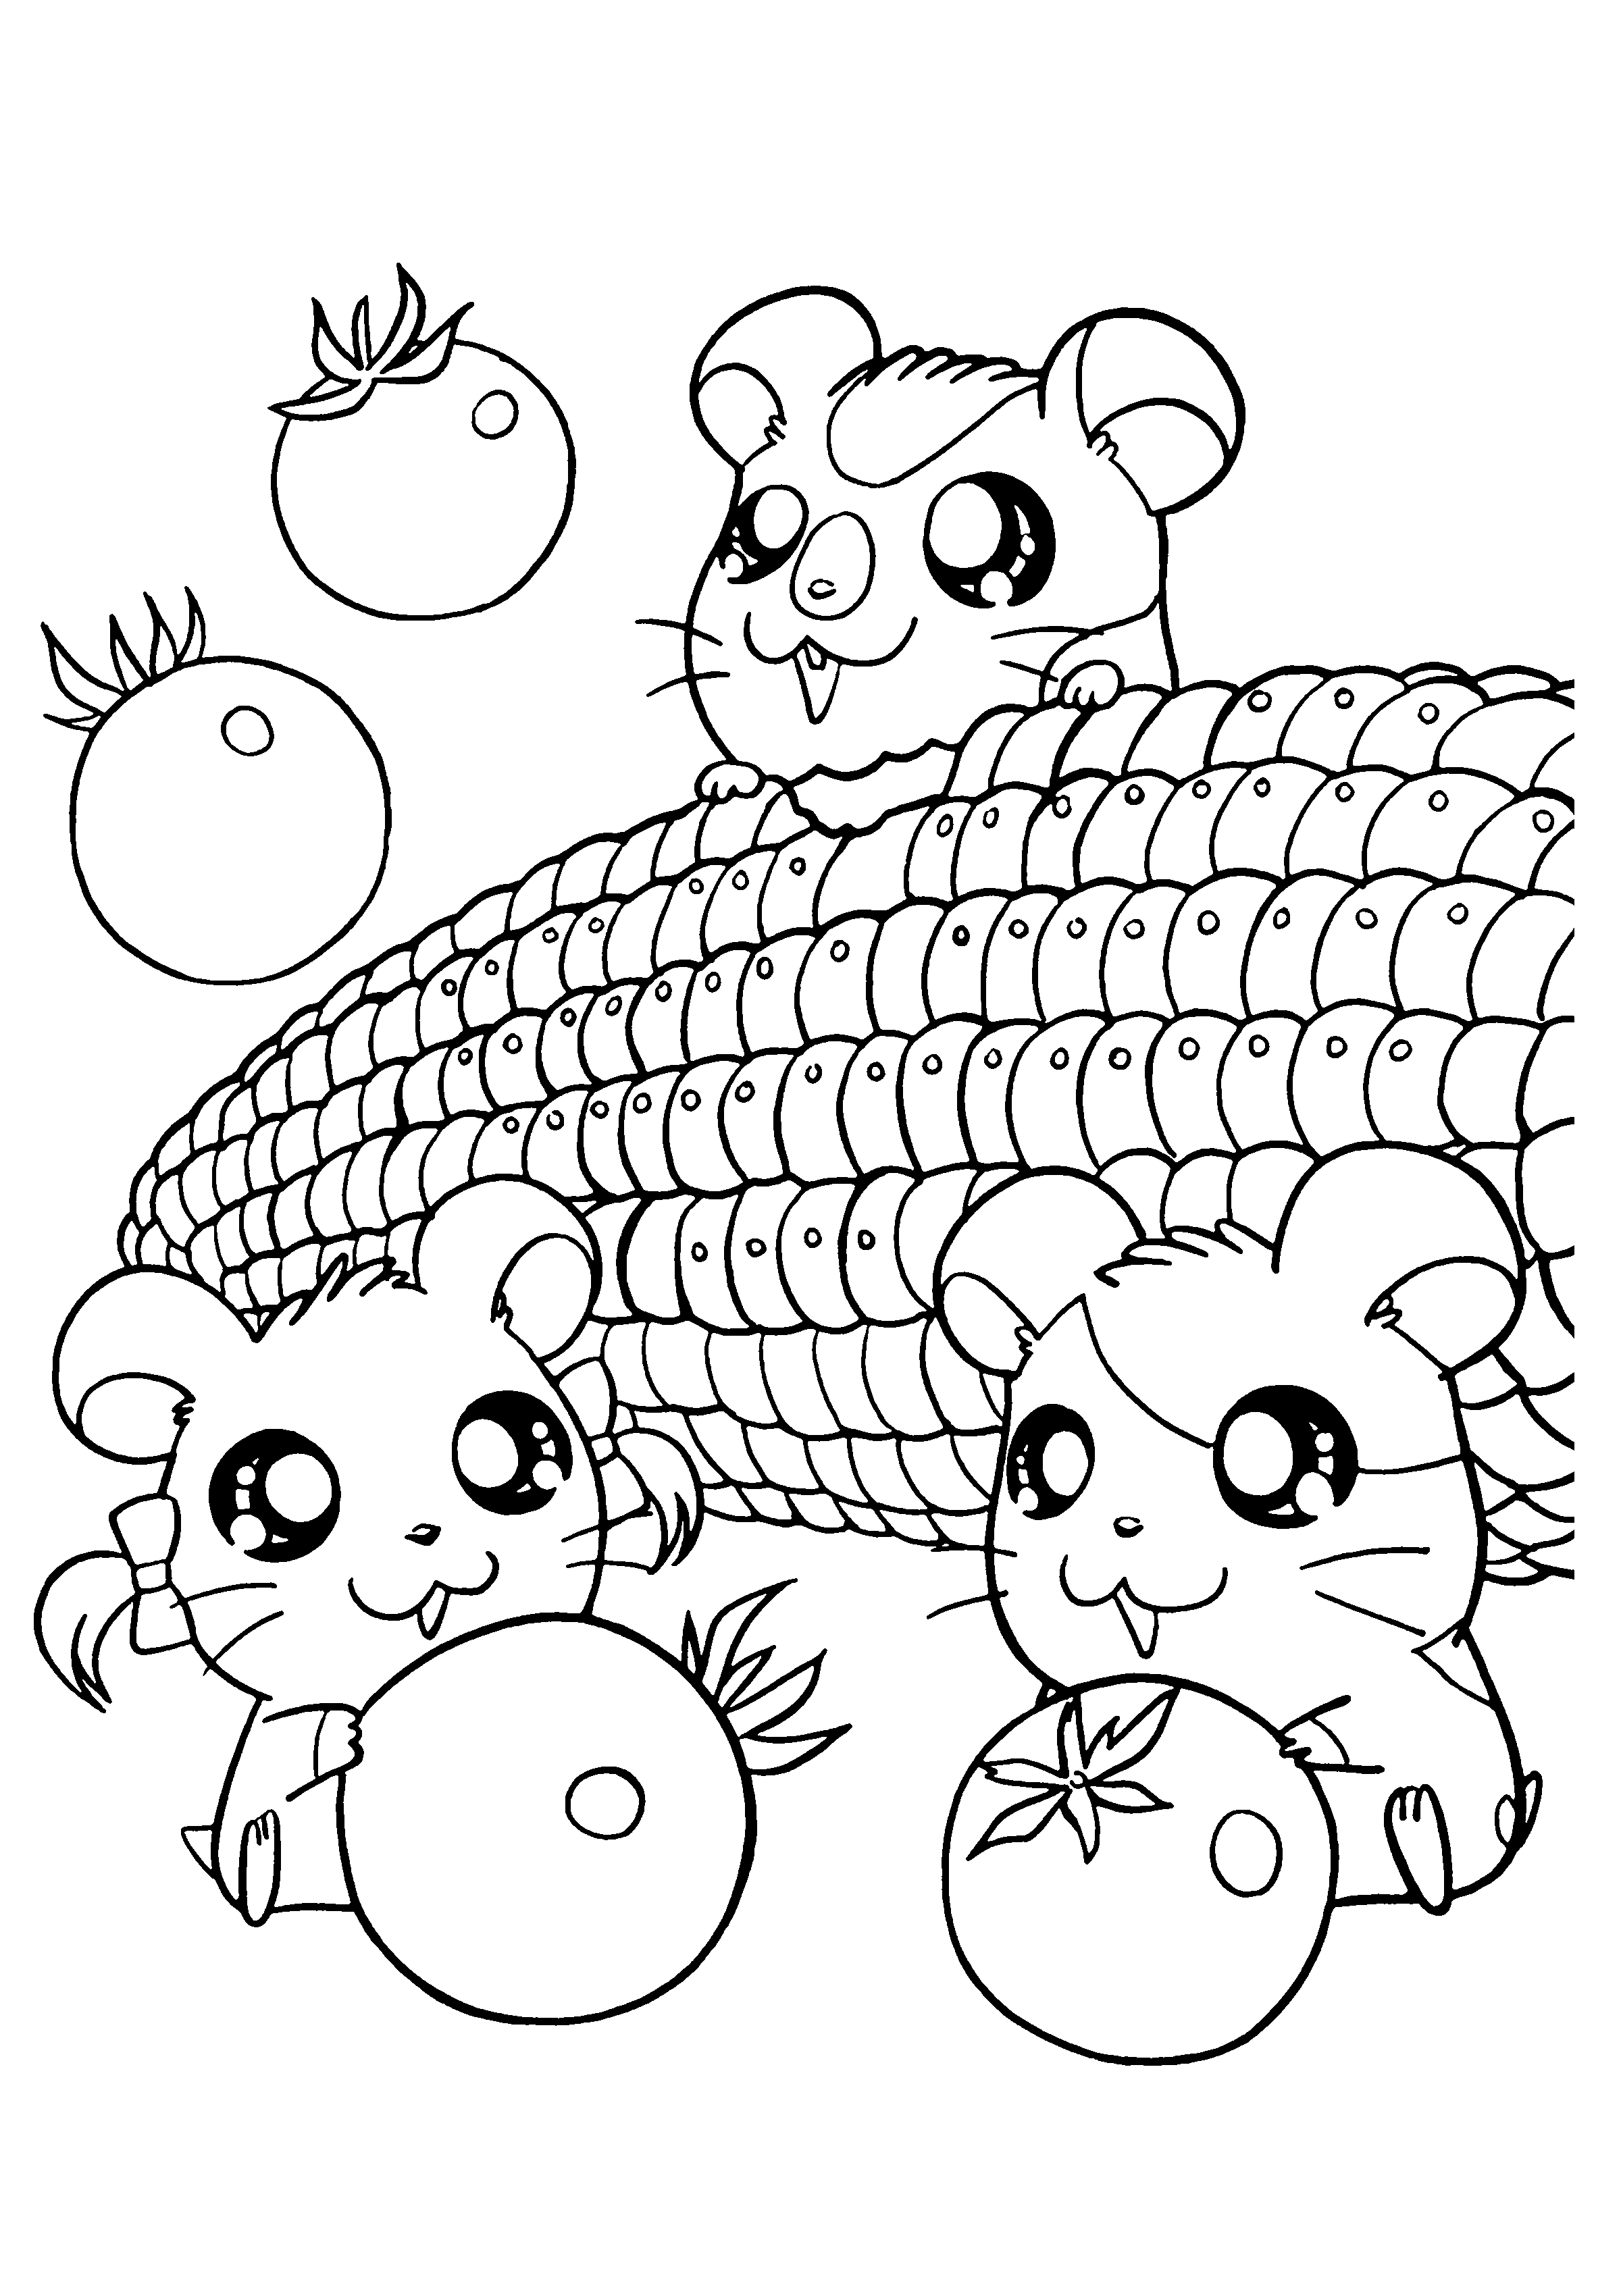 Cute Kawaii Food Coloring Pages Sketch Coloring Page